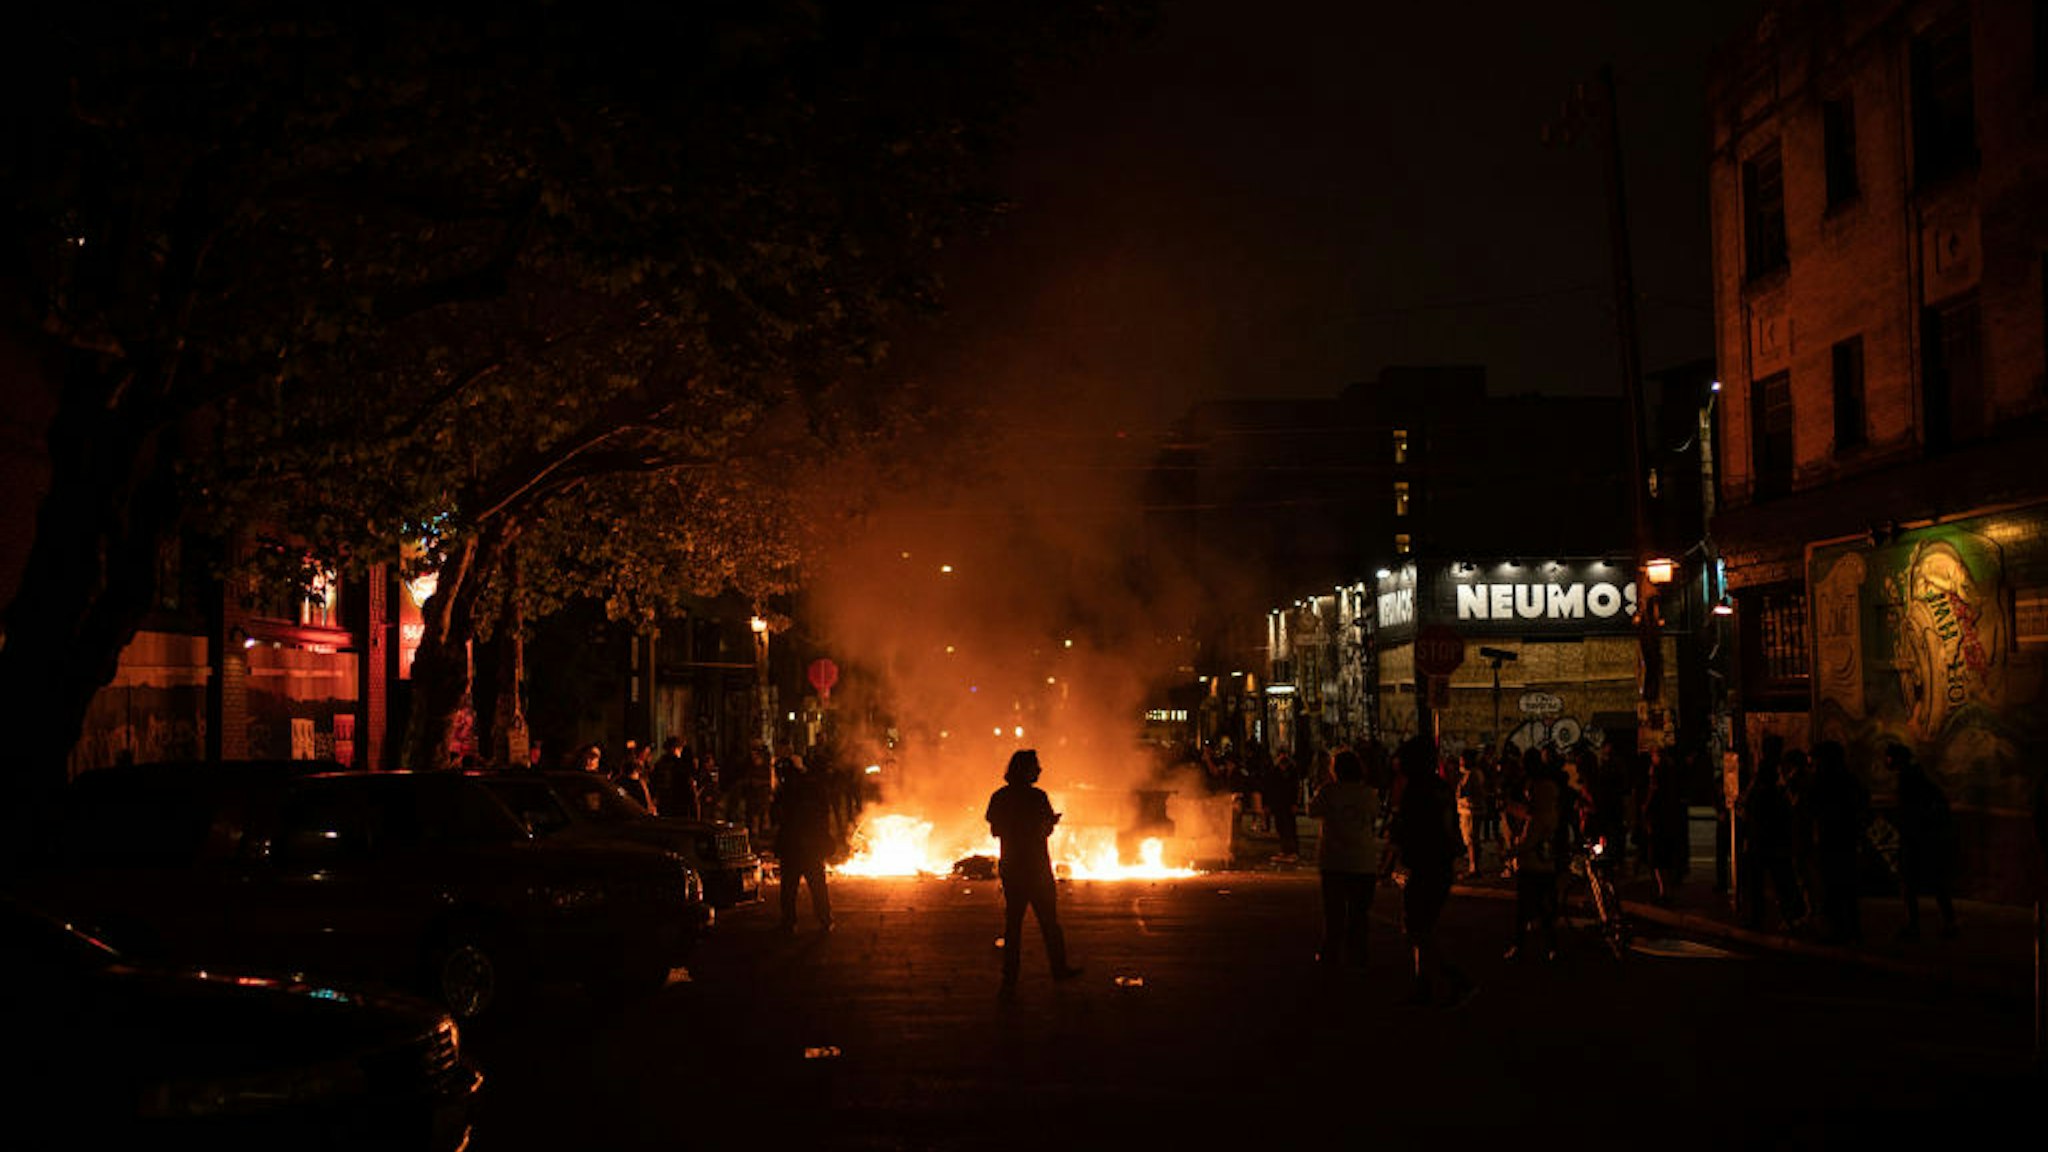 A demonstrator watches a fire burn in the street after clashing with law enforcement near the Seattle Police Departments East Precinct shortly after midnight on June 8, 2020 in Seattle, Washington.